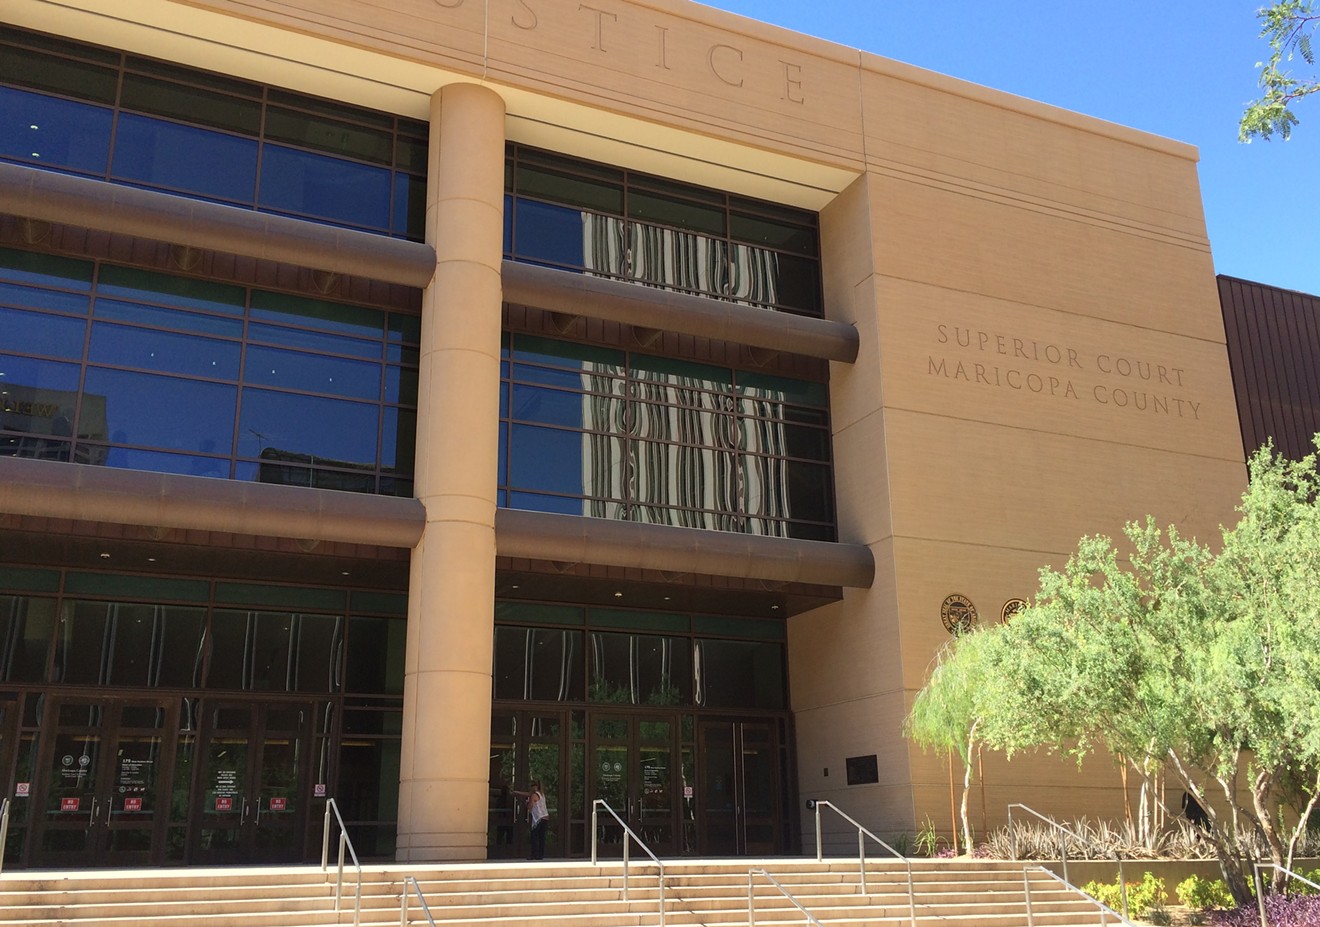 The Maricopa County Superior Court building in downtown Phoenix.